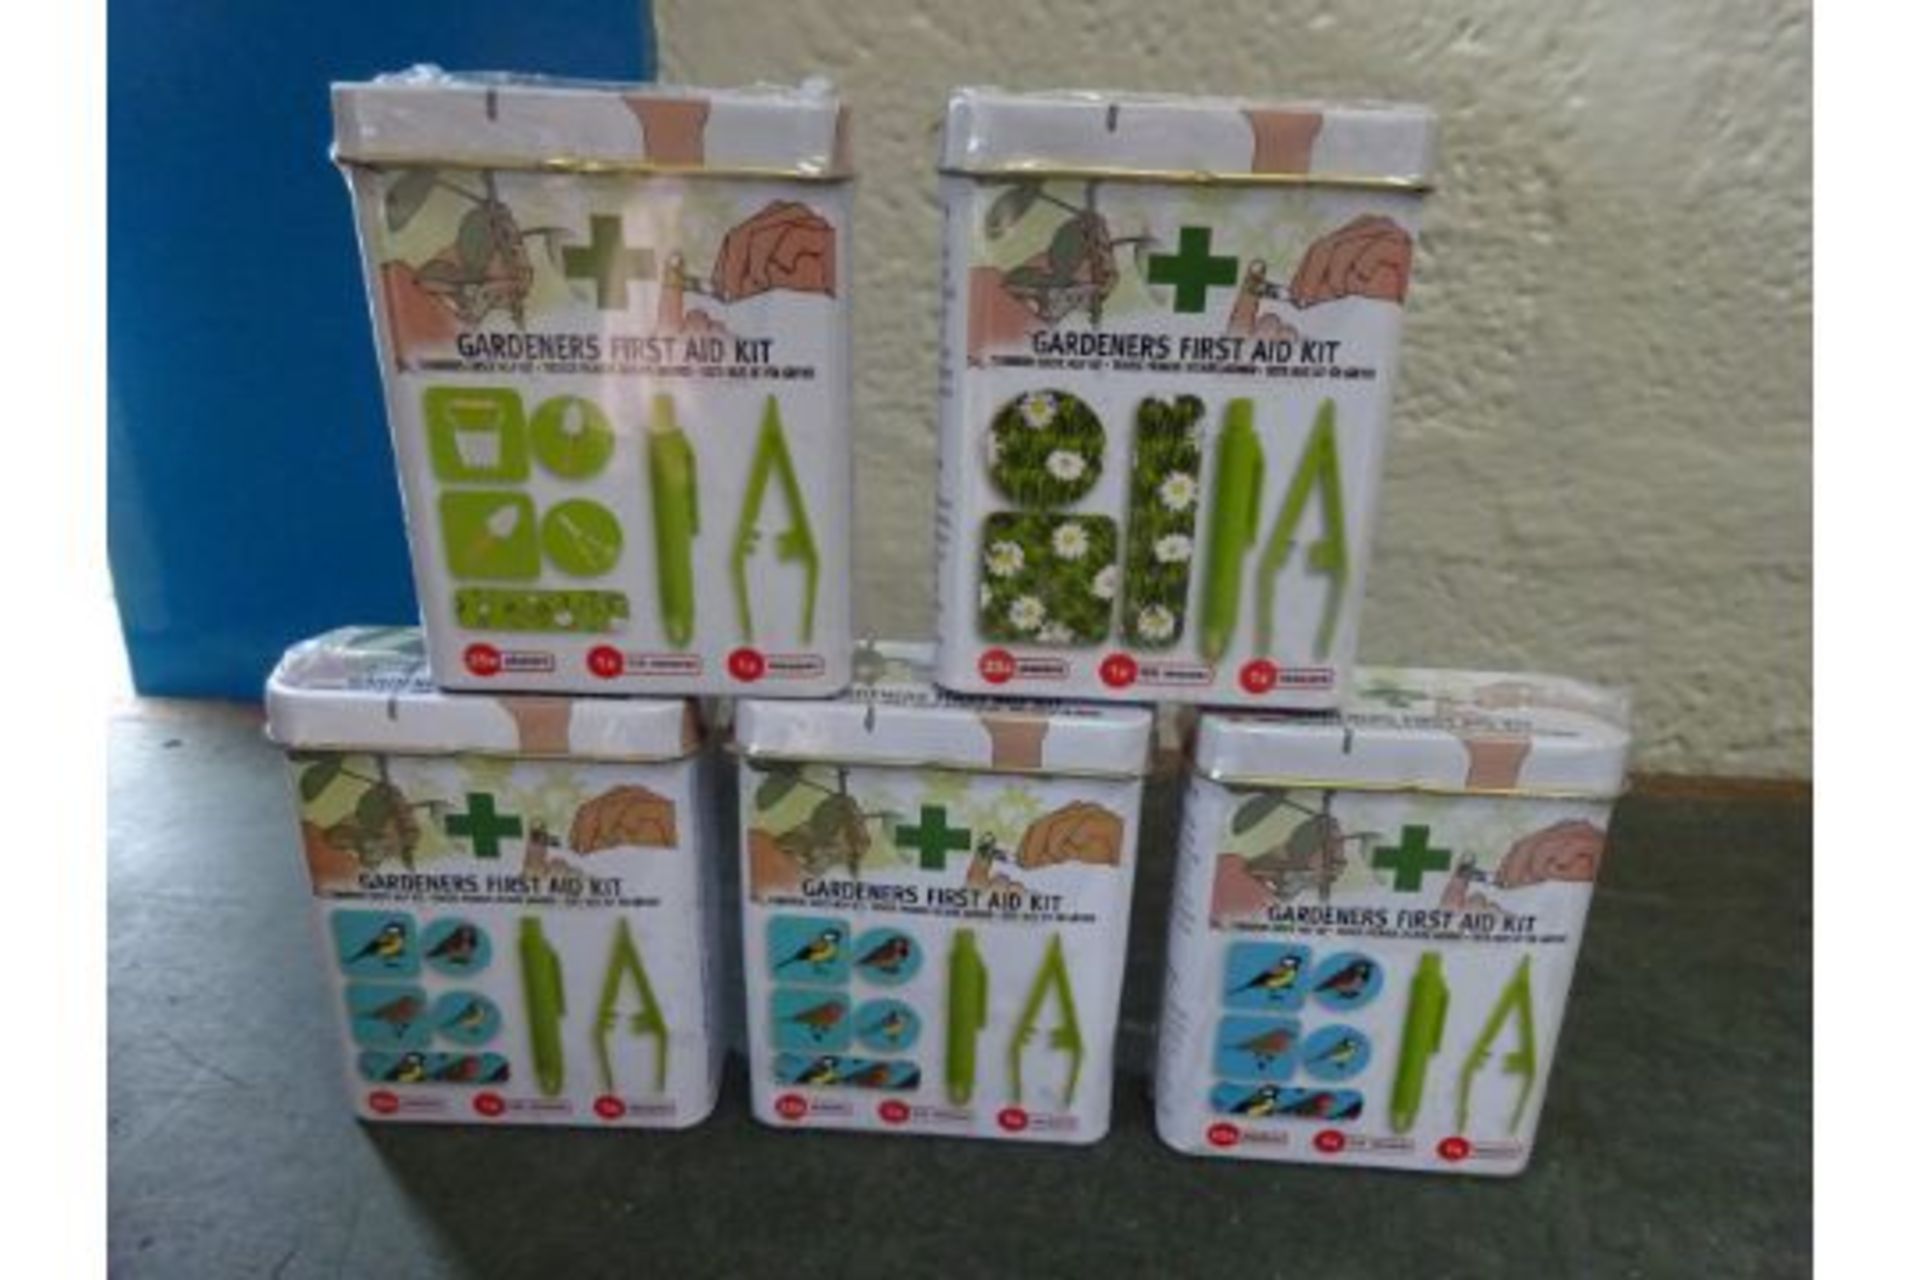 x5 New Fallen Fruits Gardeners First Aid Kits - Each Pack Has 25 Plasters, 1 Tick Remover, 1